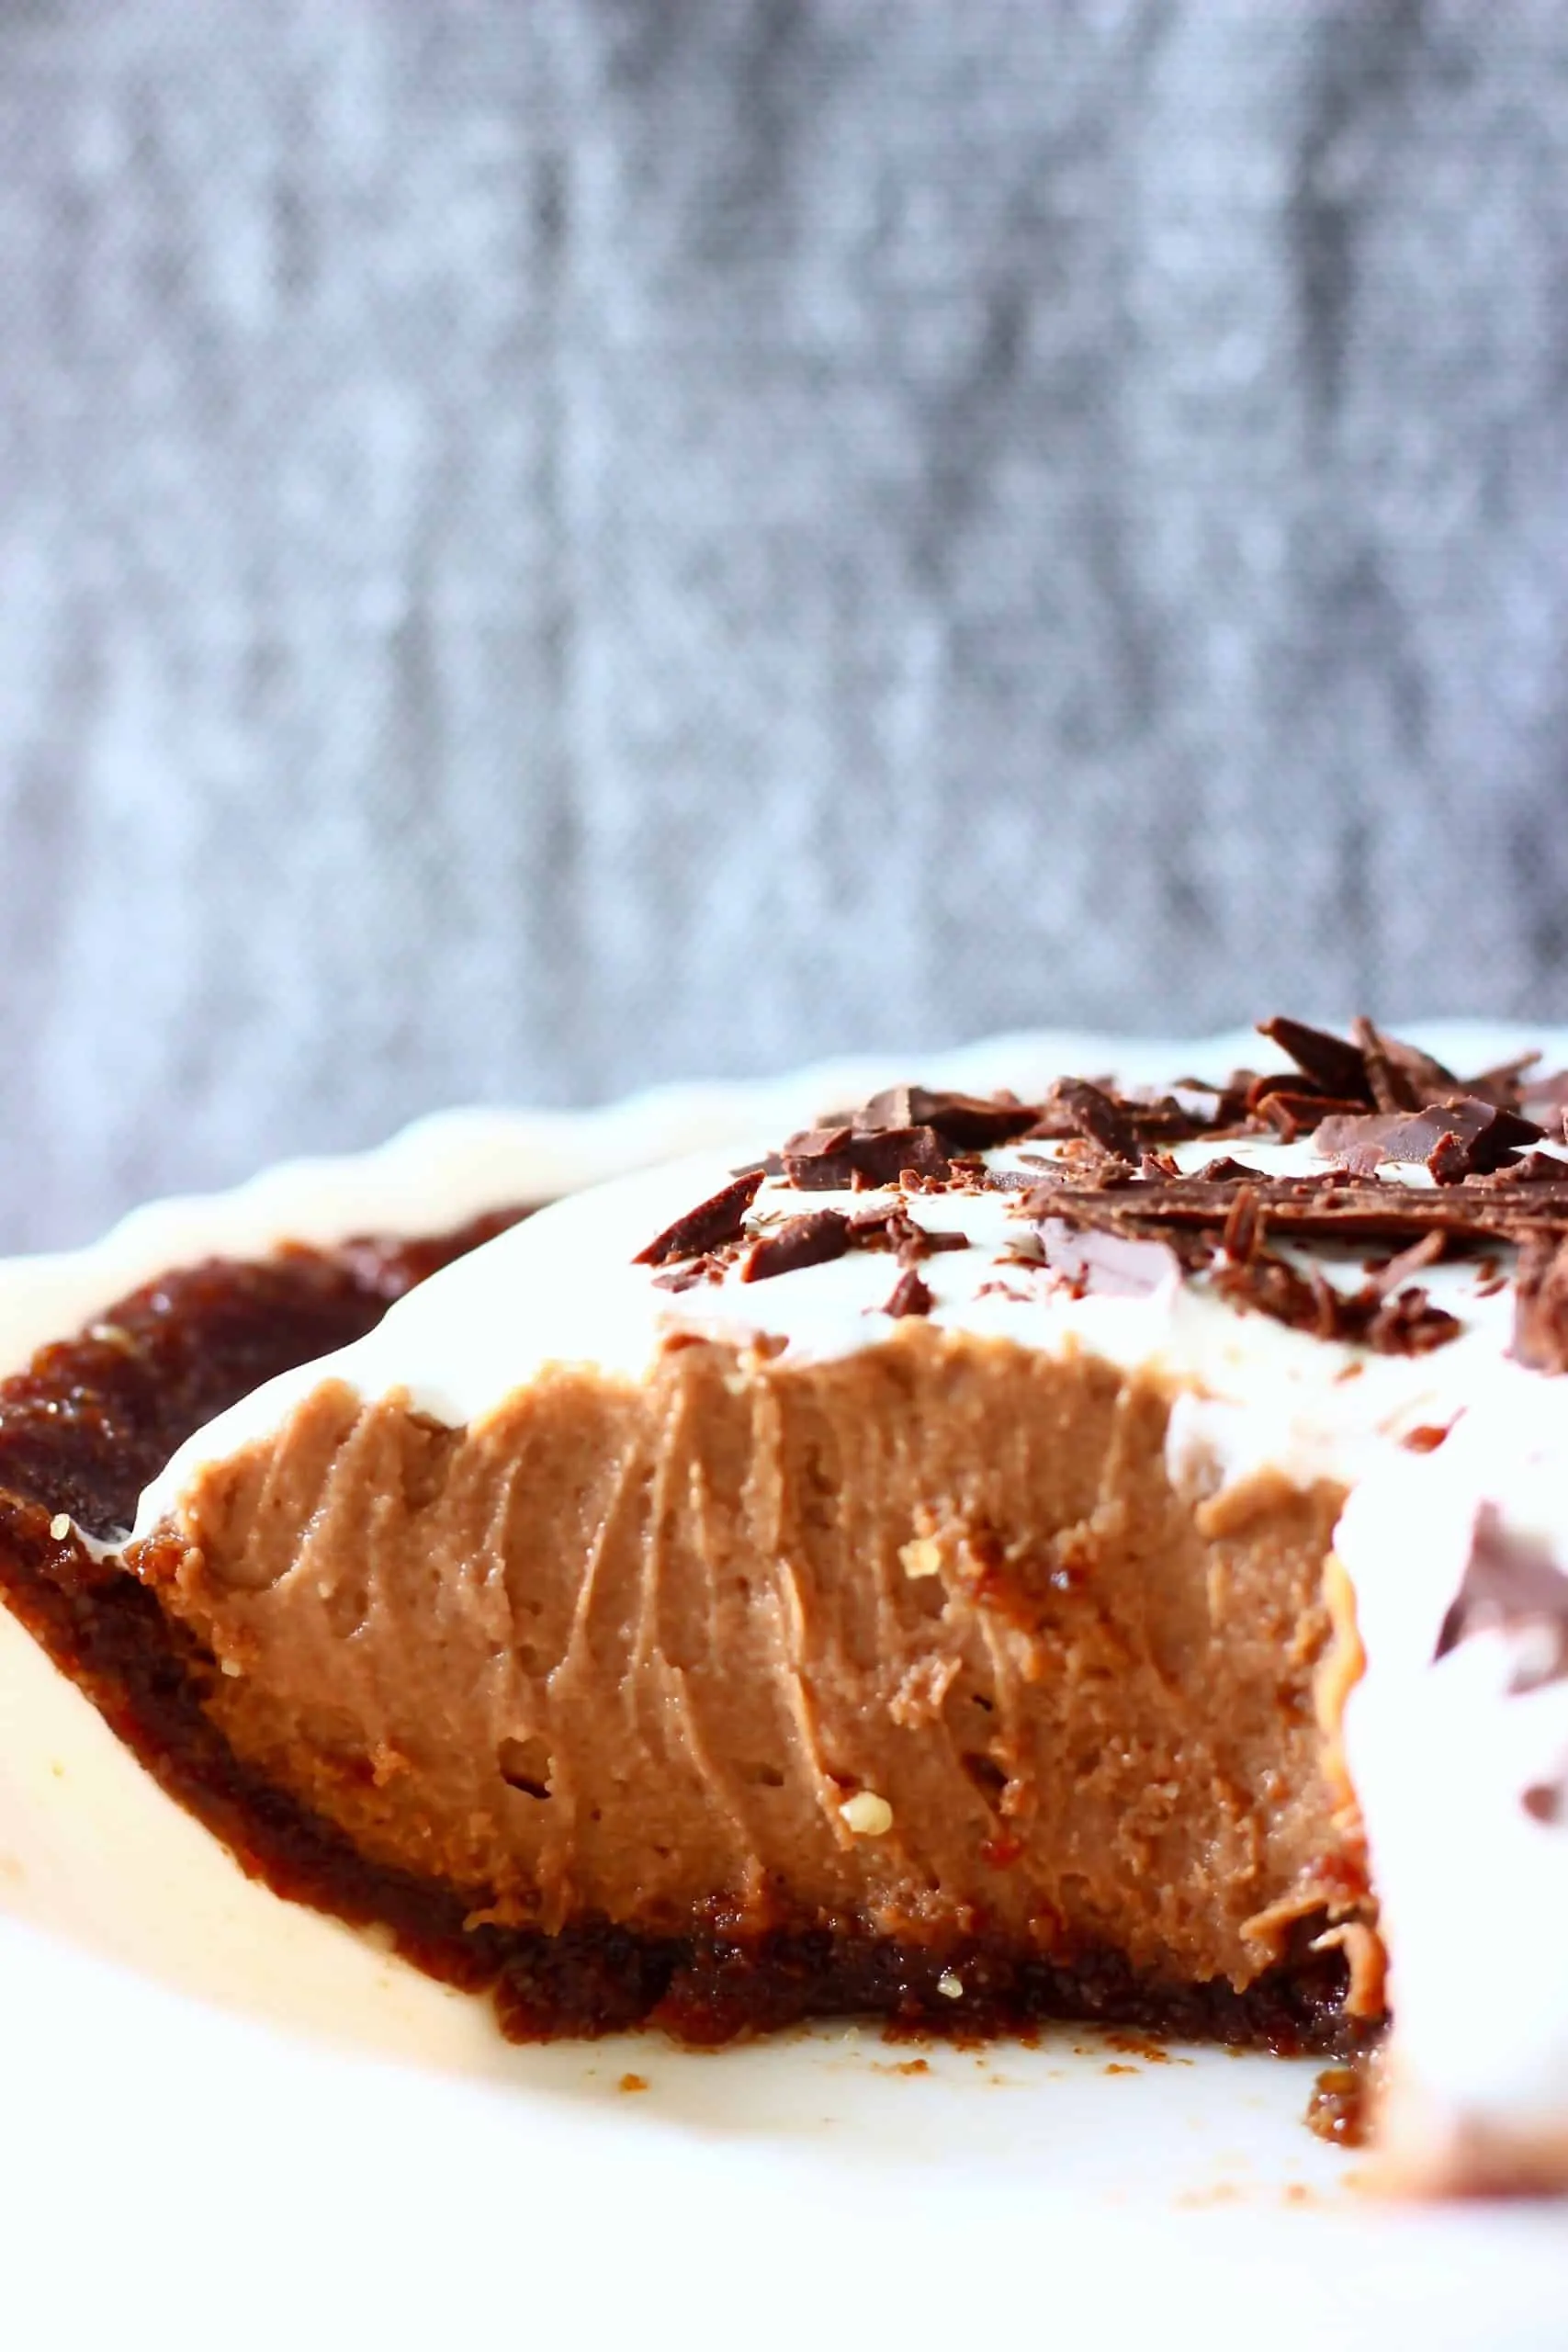 Vegan chocolate pie with chocolate pie crust, chocolate filling and white cream in a pie dish